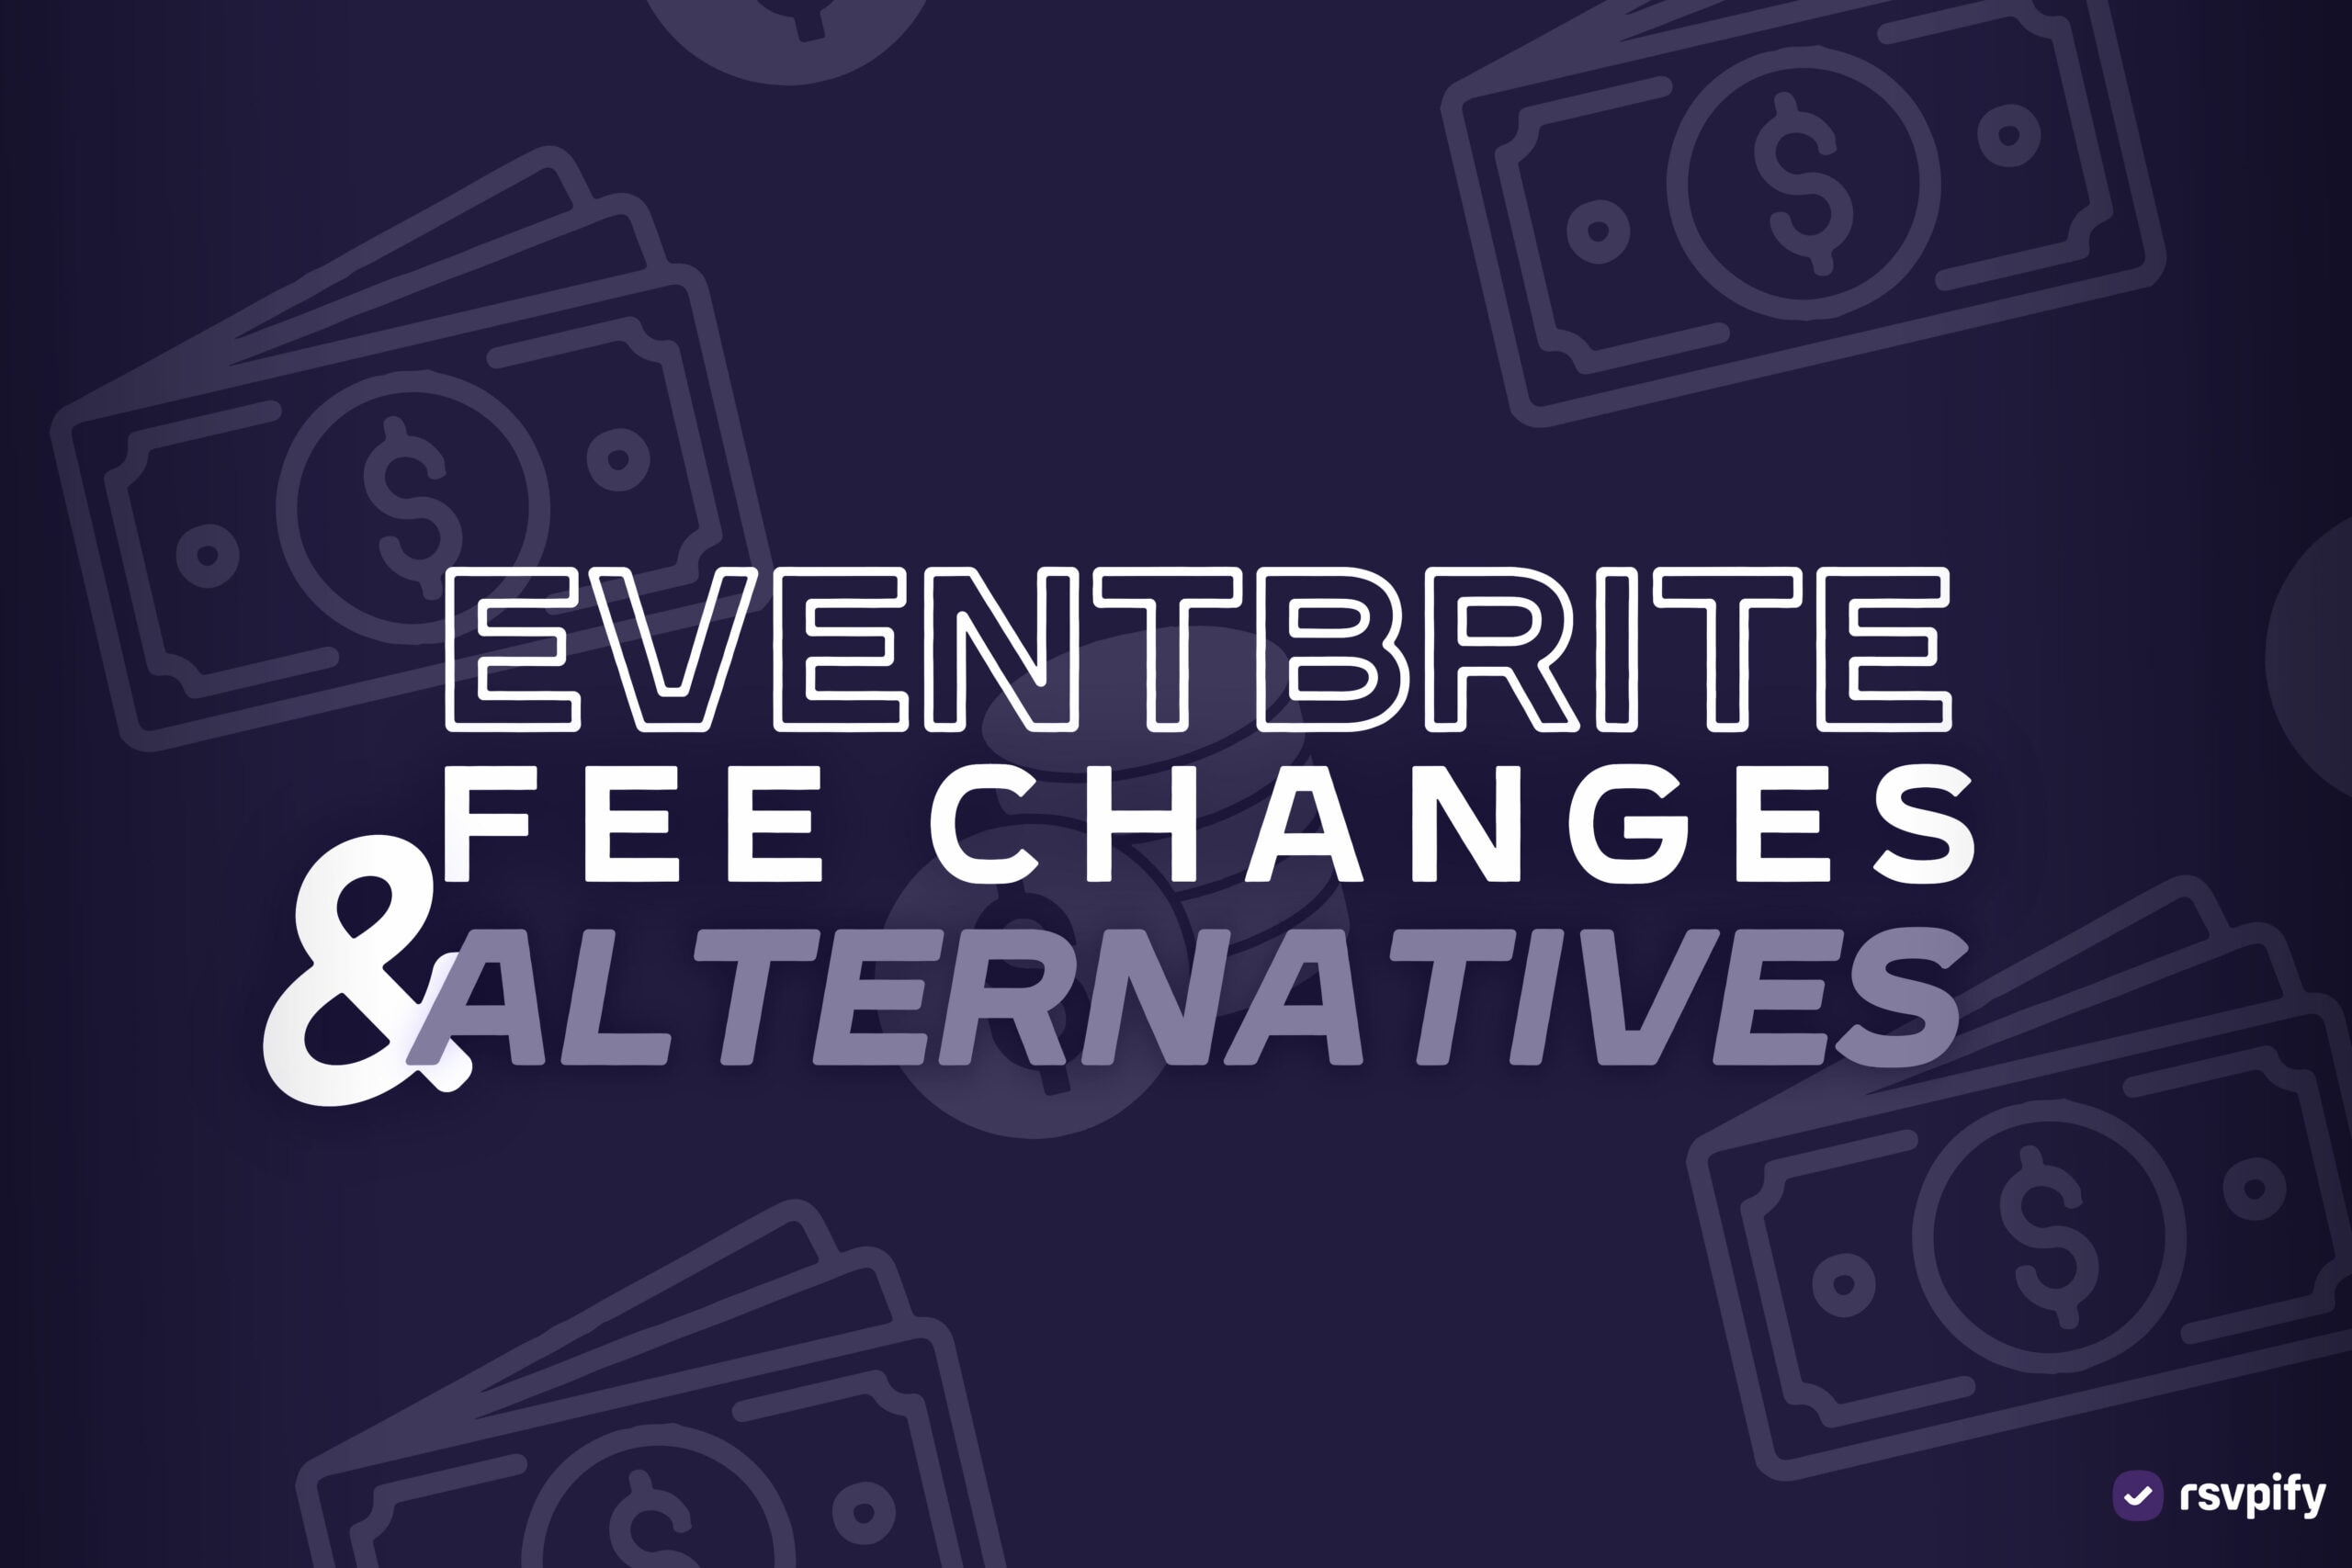 How much does Eventbrite cost after their pricing shift?